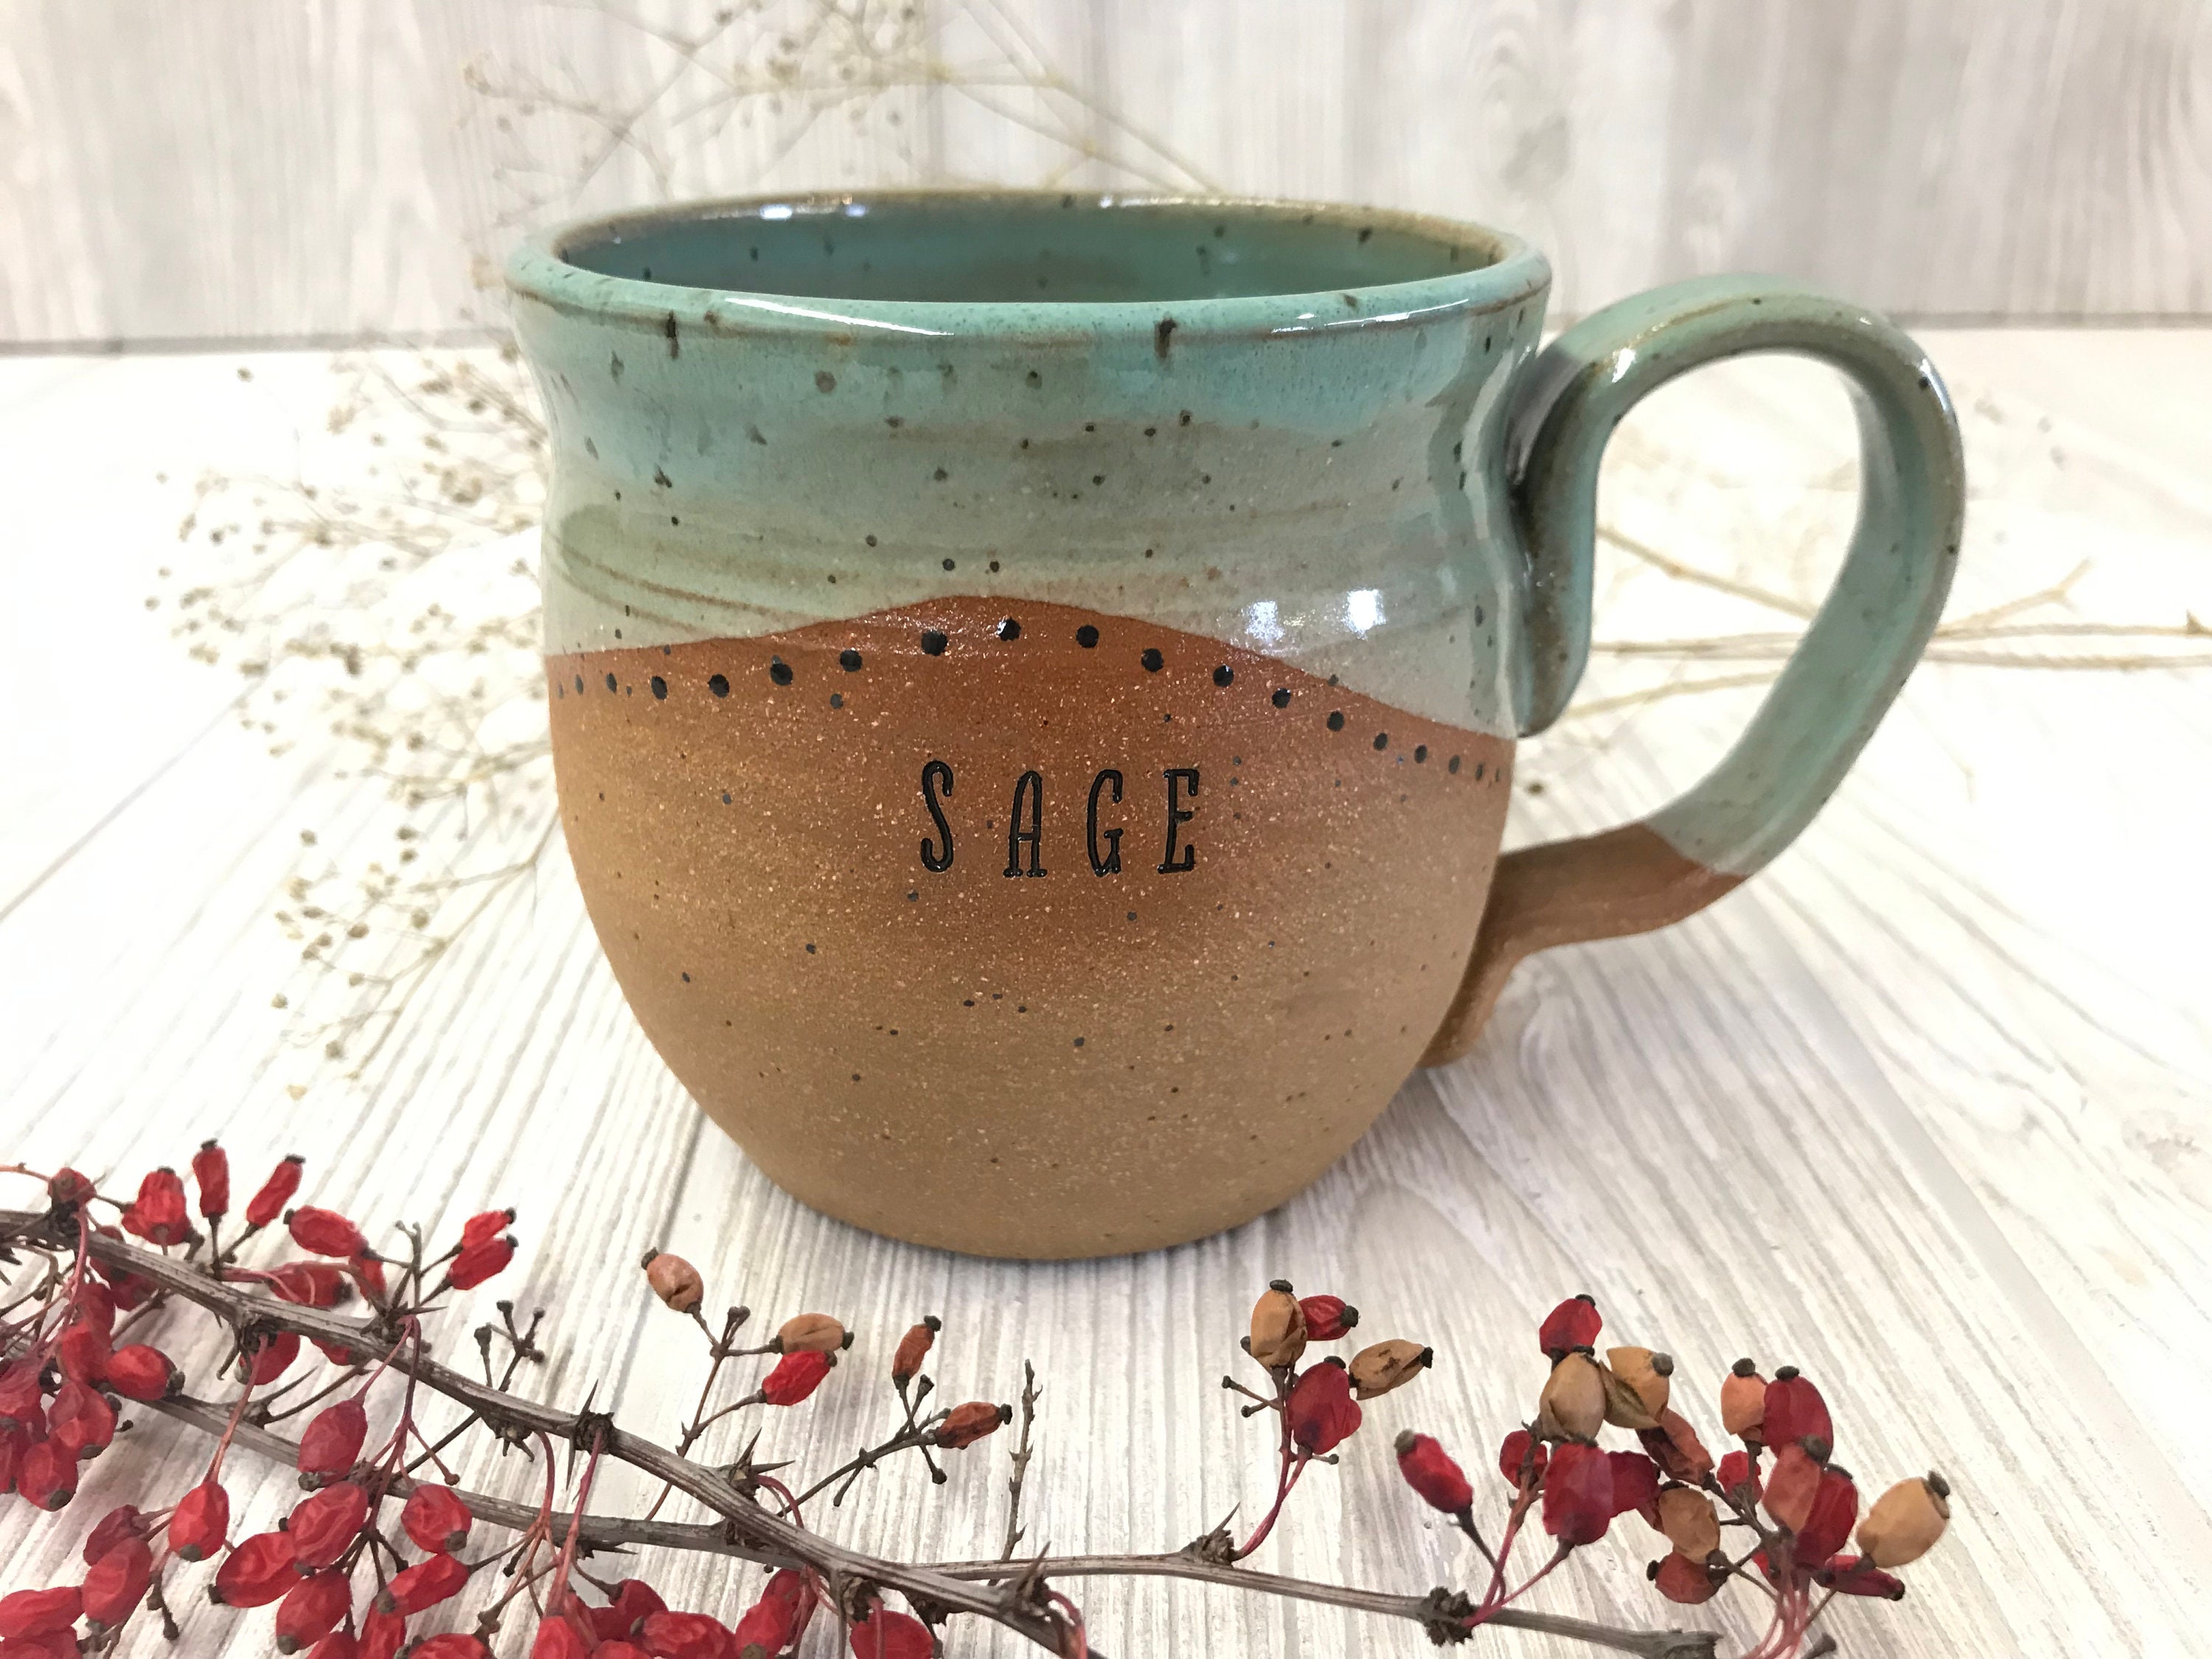 Handmade Pottery Mug with Blue and Black Accents Gift 16oz Large Mug for Coffee & Tea Pottery Cup with Large Handle MADE TO ORDER